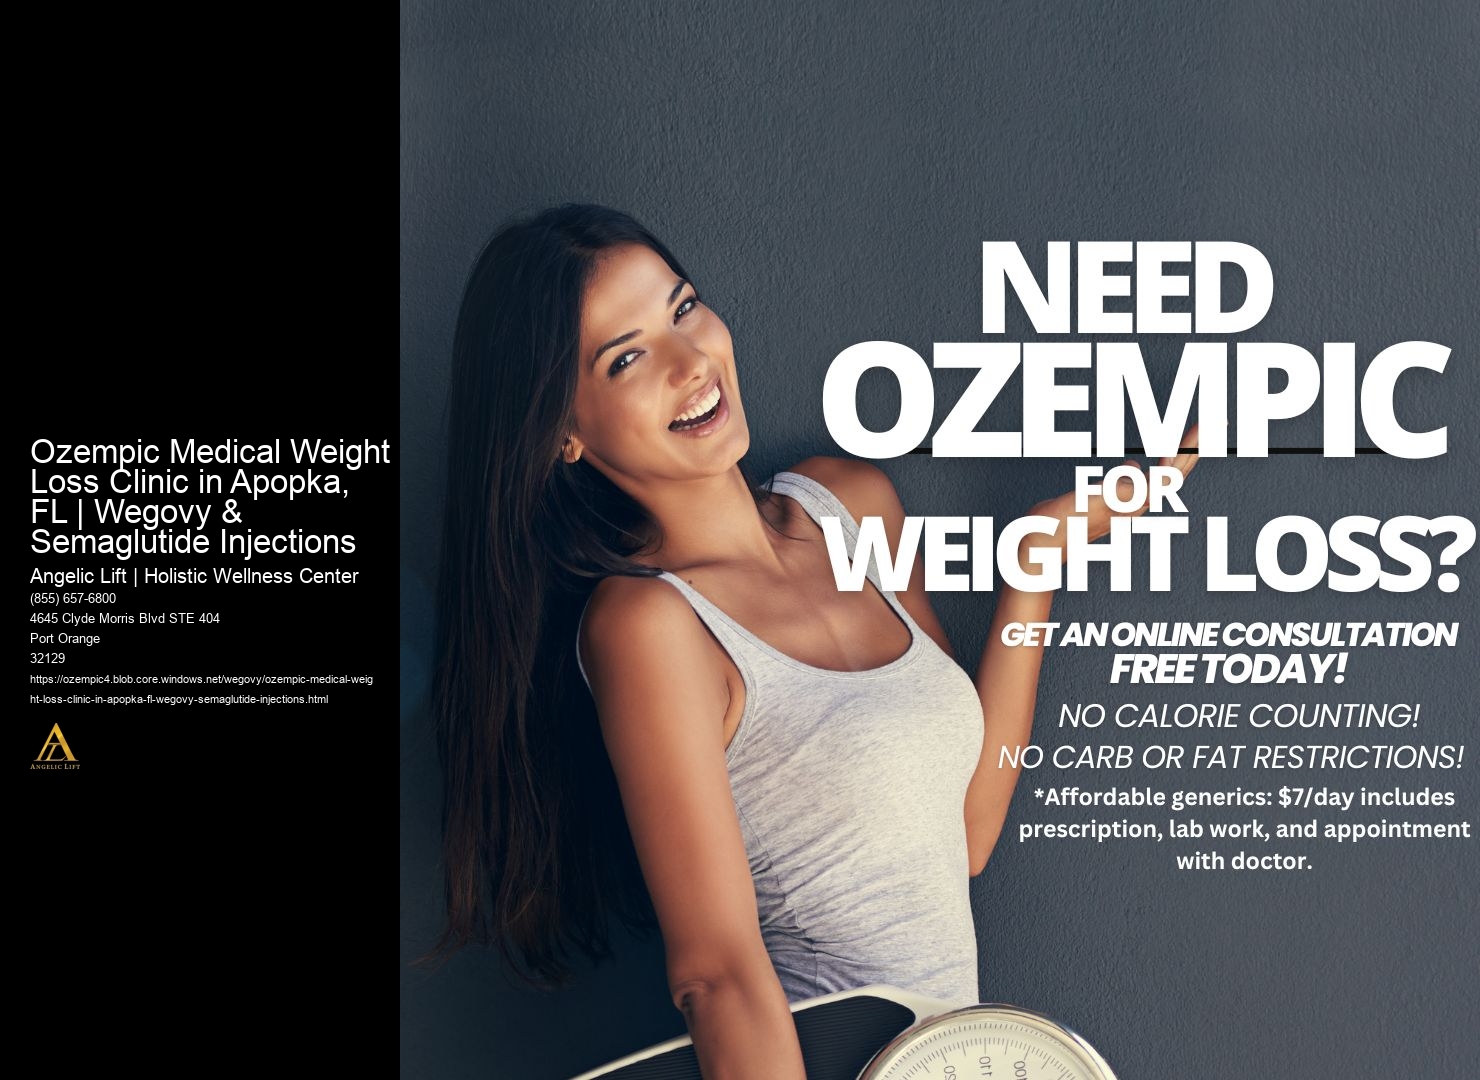 Ozempic Medical Weight Loss Clinic in Apopka, FL | Wegovy & Semaglutide Injections